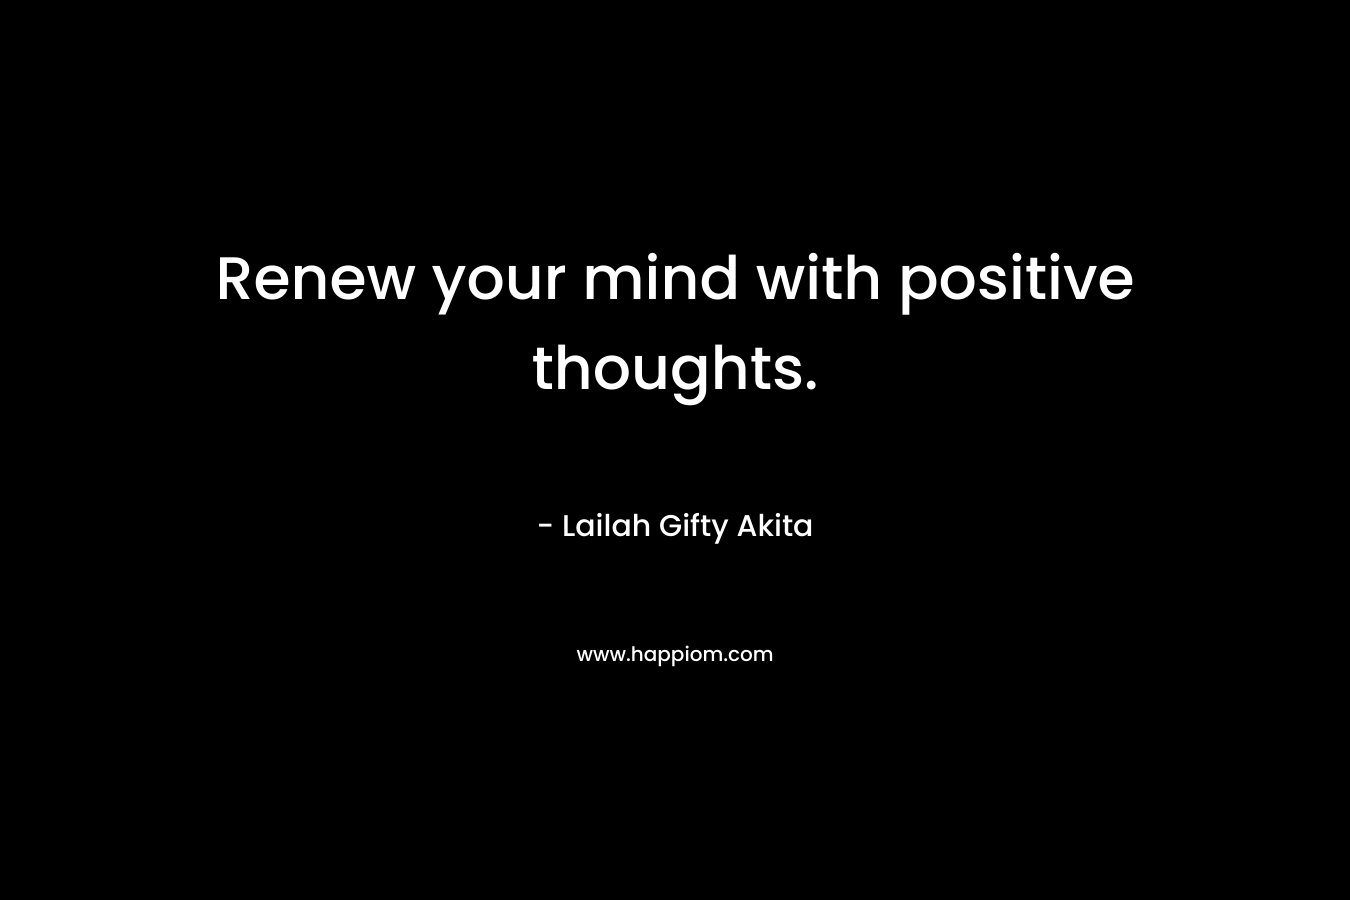 Renew your mind with positive thoughts.